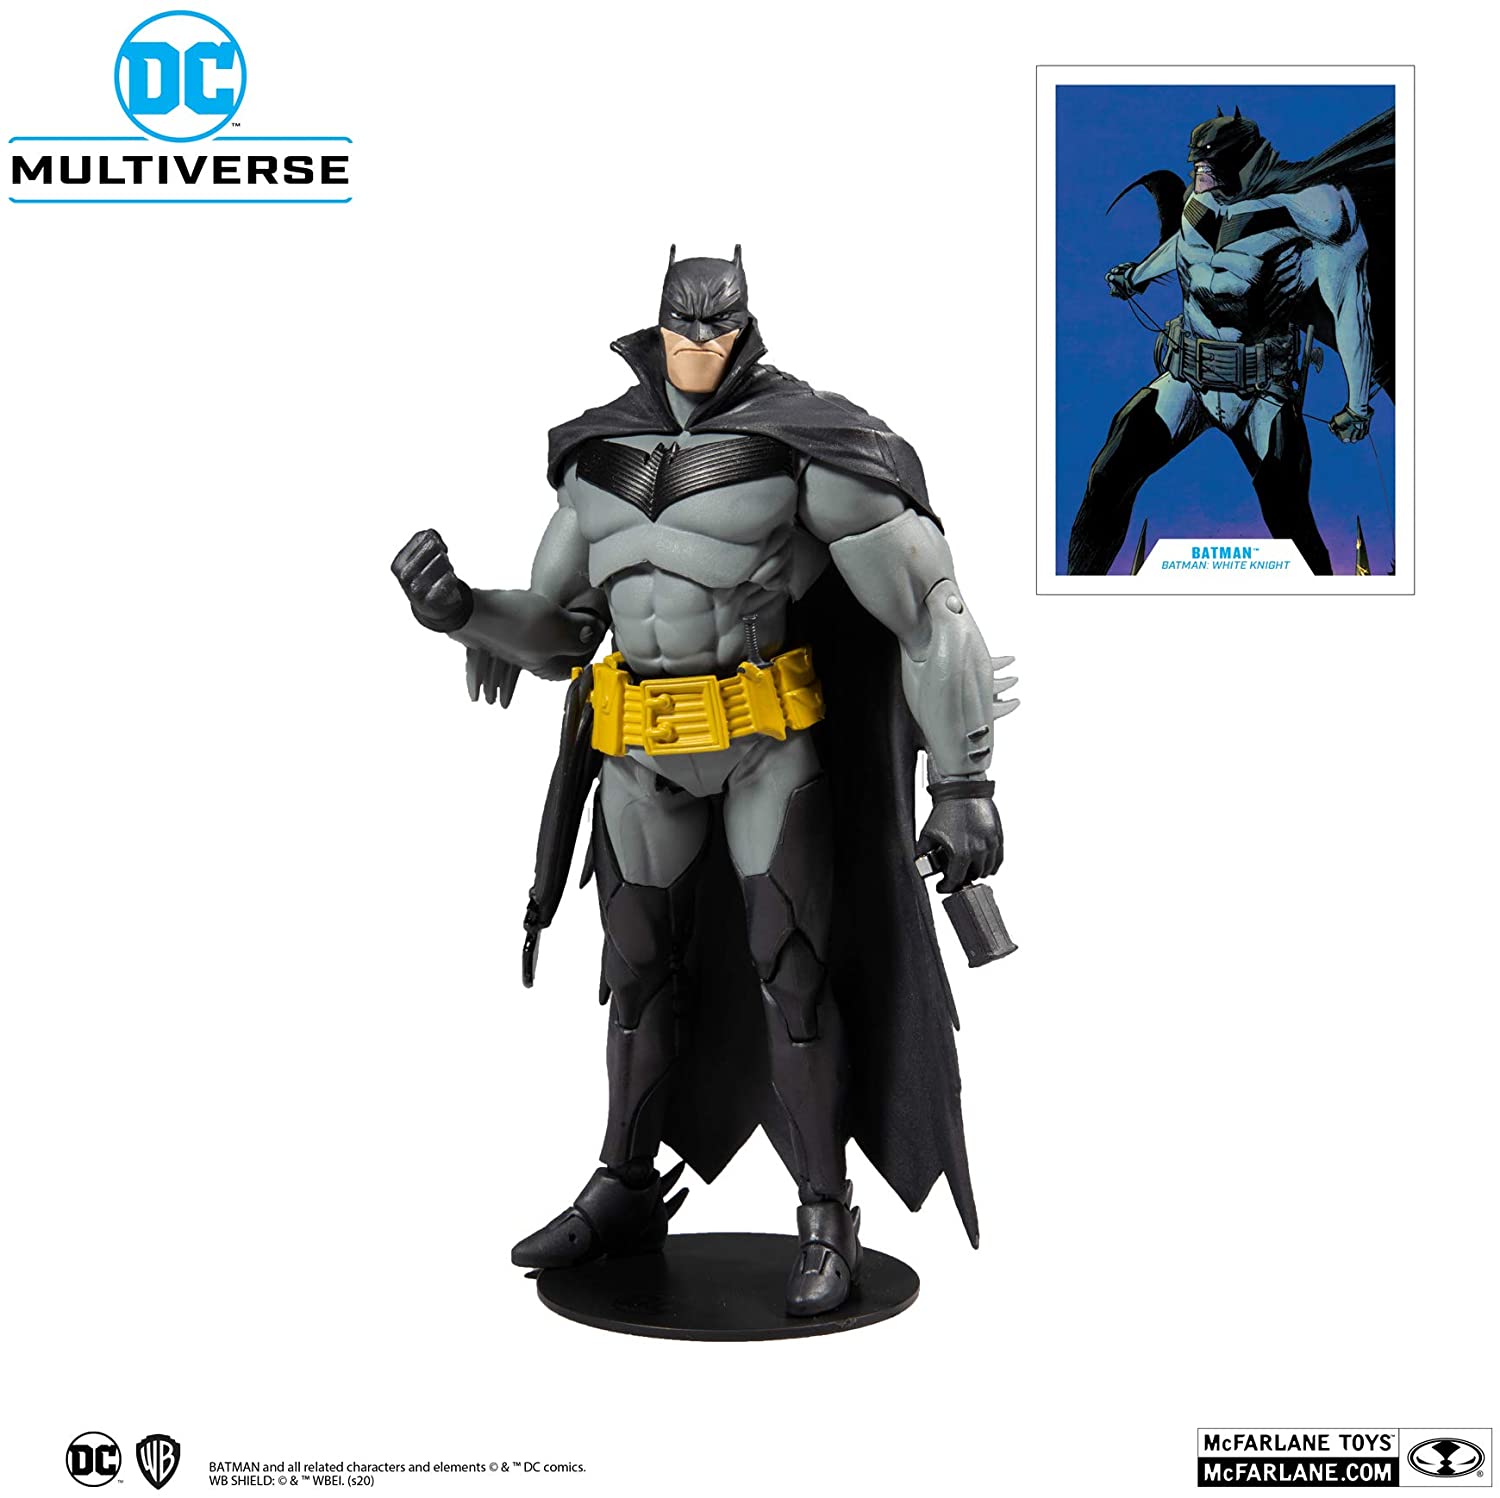 DC Collector Wave 2 White Knight Batman 7 Inch Scale Action Figure